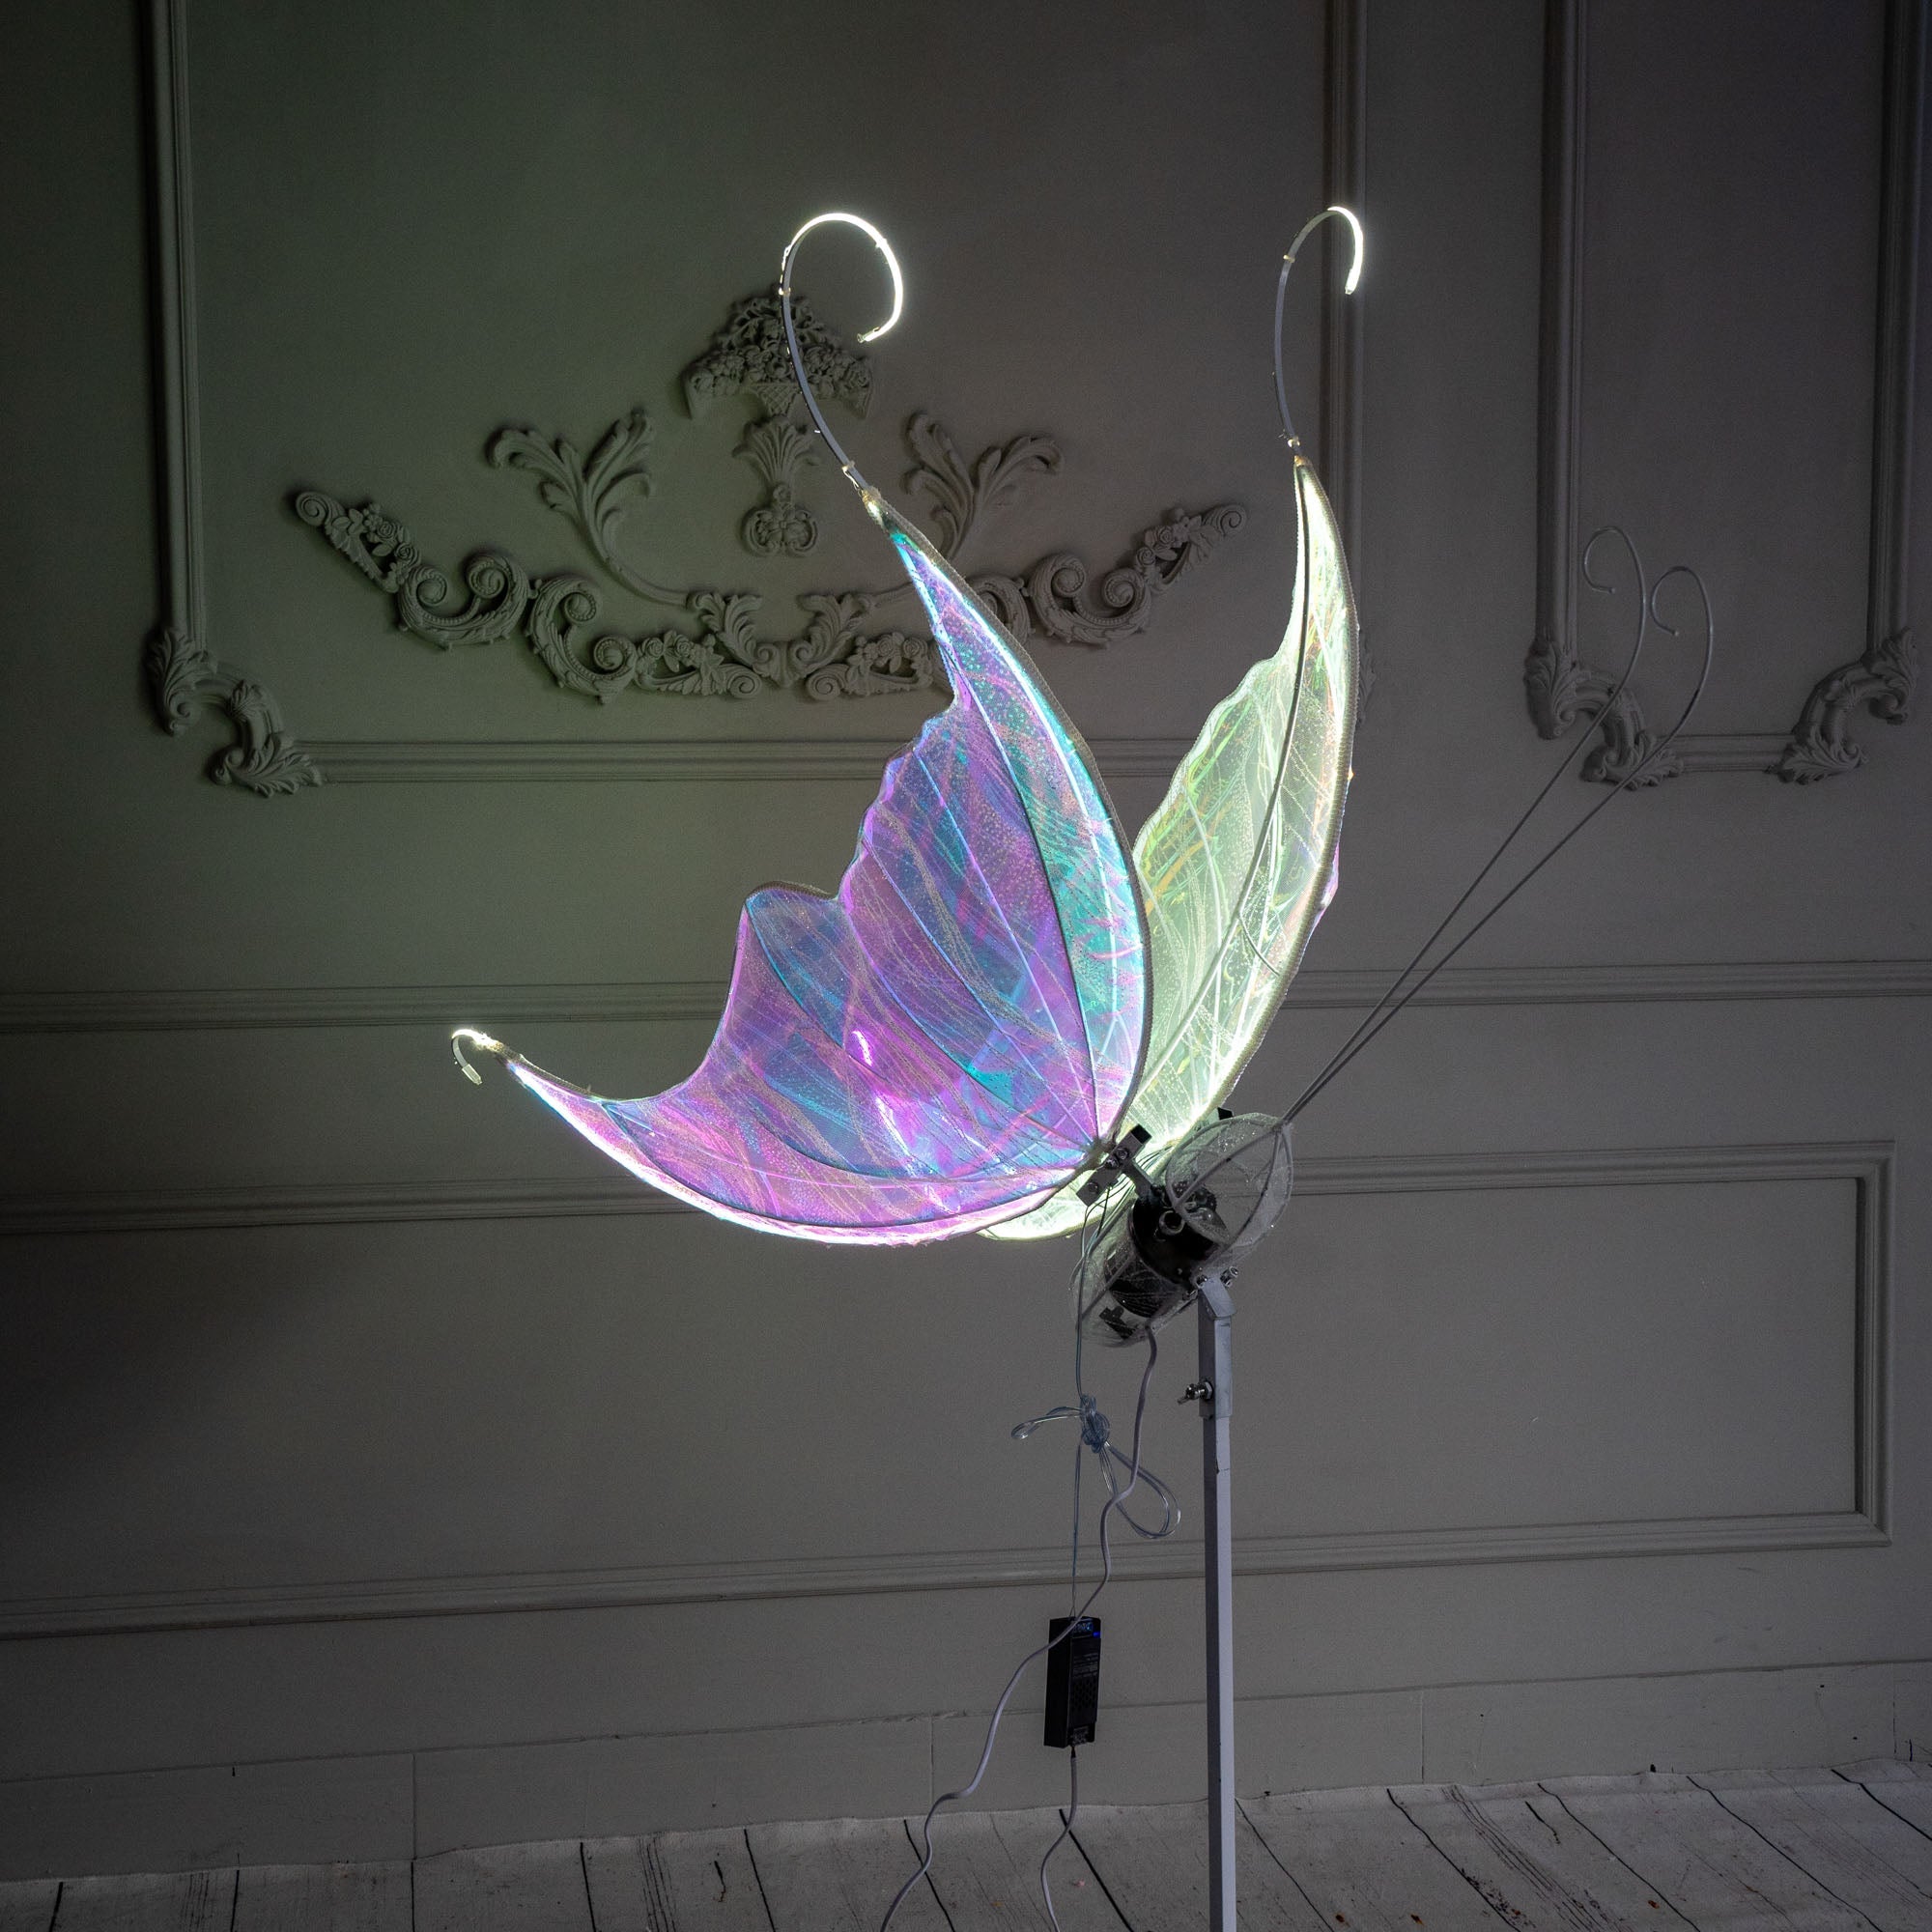 Set of 2 Colorful White Electric Butterfly Light Party Lights for Event Wedding Decor Props - KetieStory